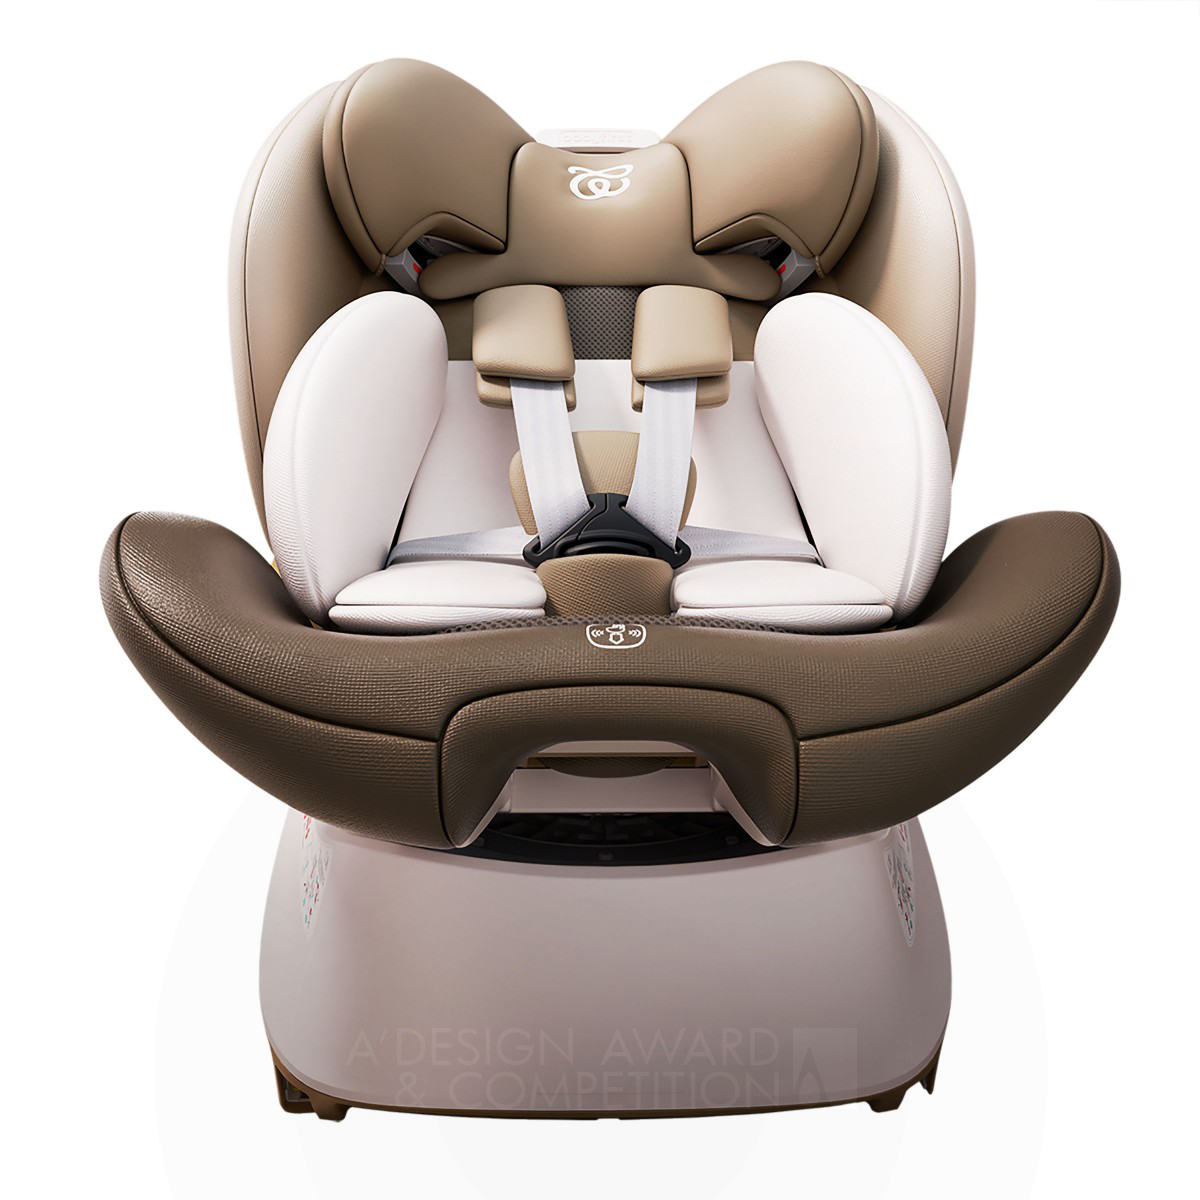 Babyfirst Genius Pro R156 Safety Seats by Ningbo Baby First Baby Products Co., Ltd